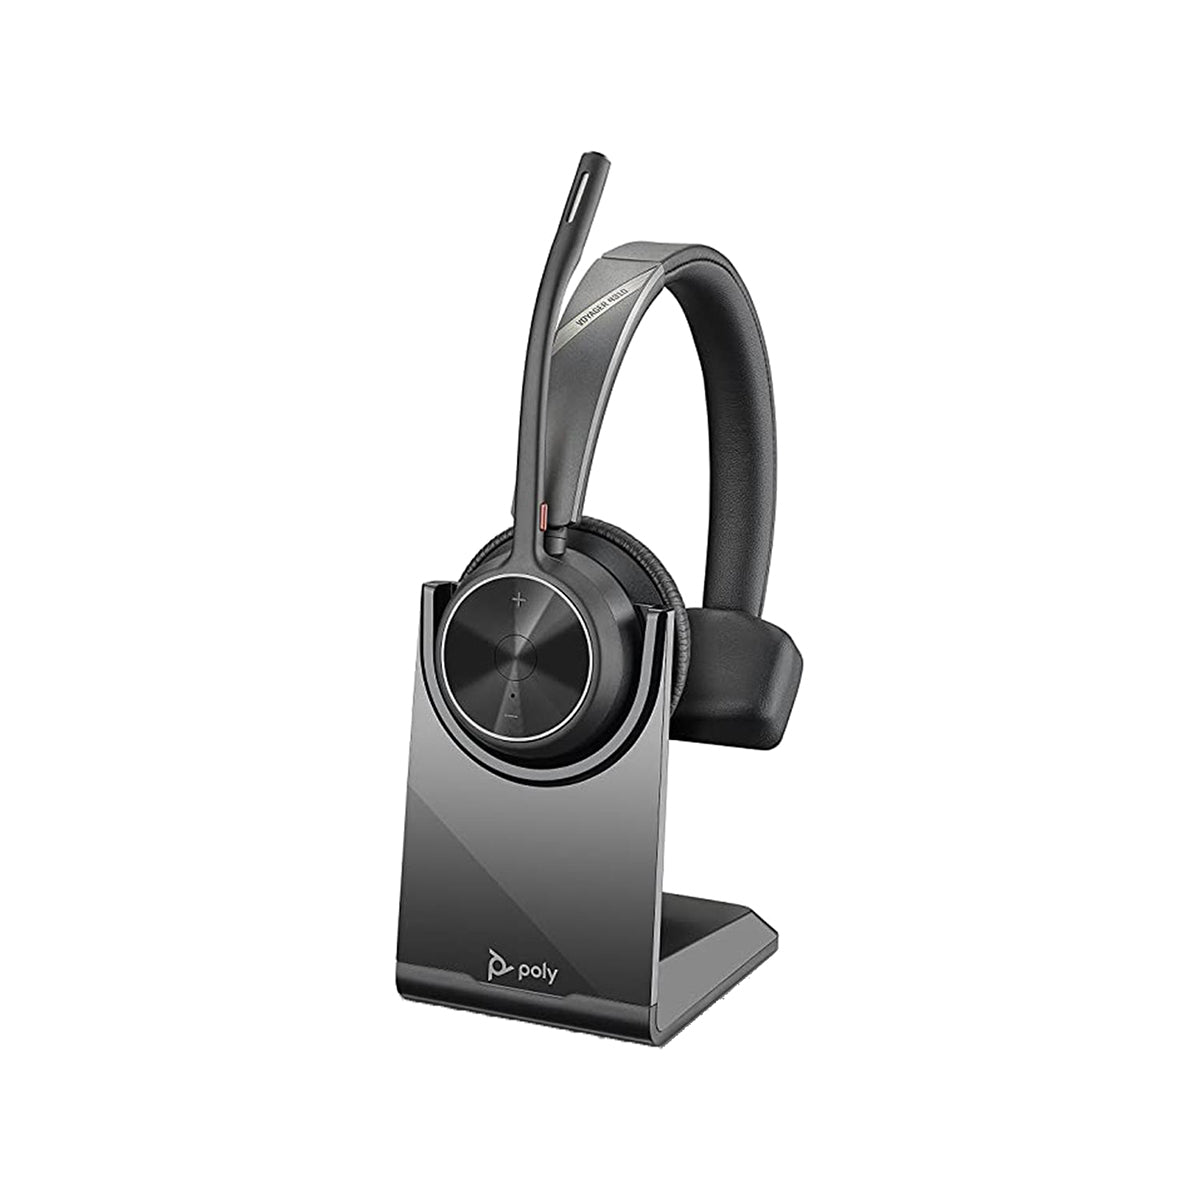 Poly Voyager Focus BT Cordless Headset B825 for PC/Laptop